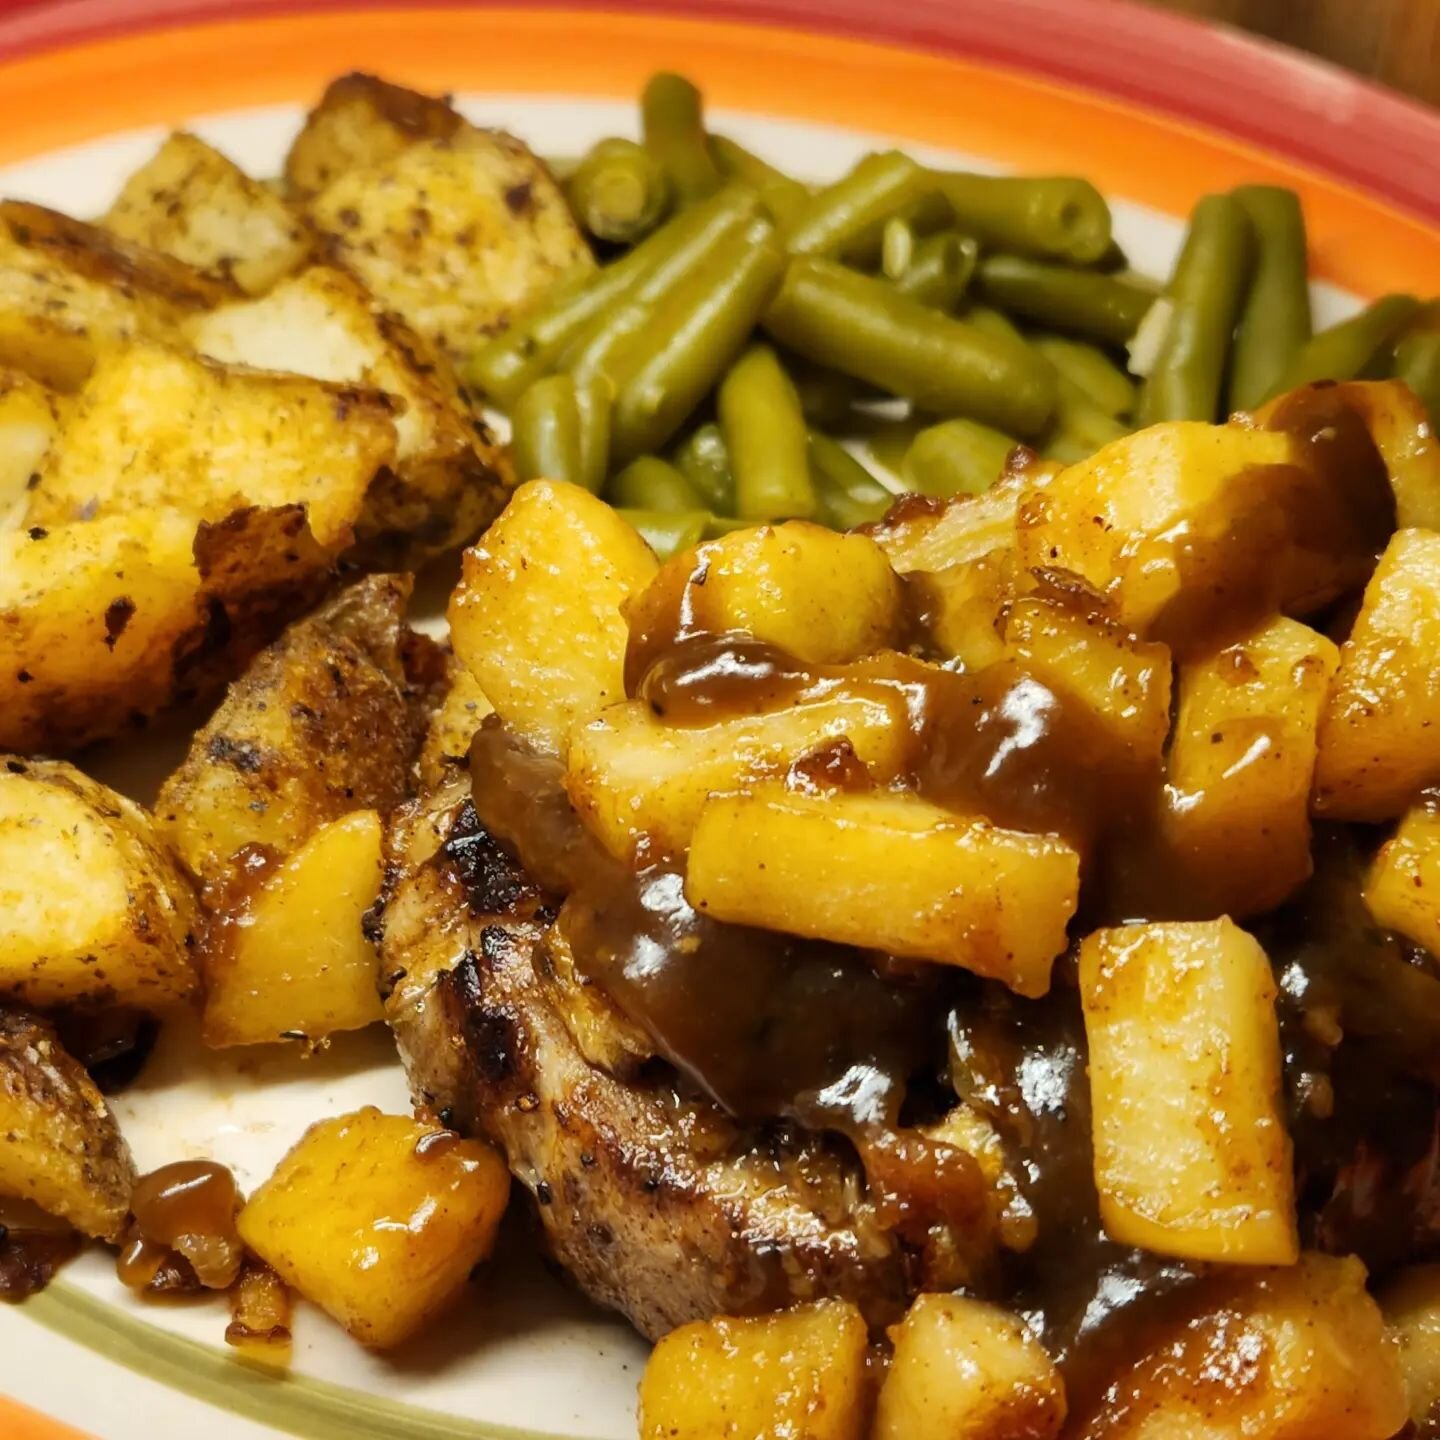 We had a delicious dinner last night. We cooked pork chops, onions and apples with our King Blossom apple pie blend, chopped garlic and black pepper. They were served with Two-Step Cajun roasted potatoes and green beans. Our company produces eight sa